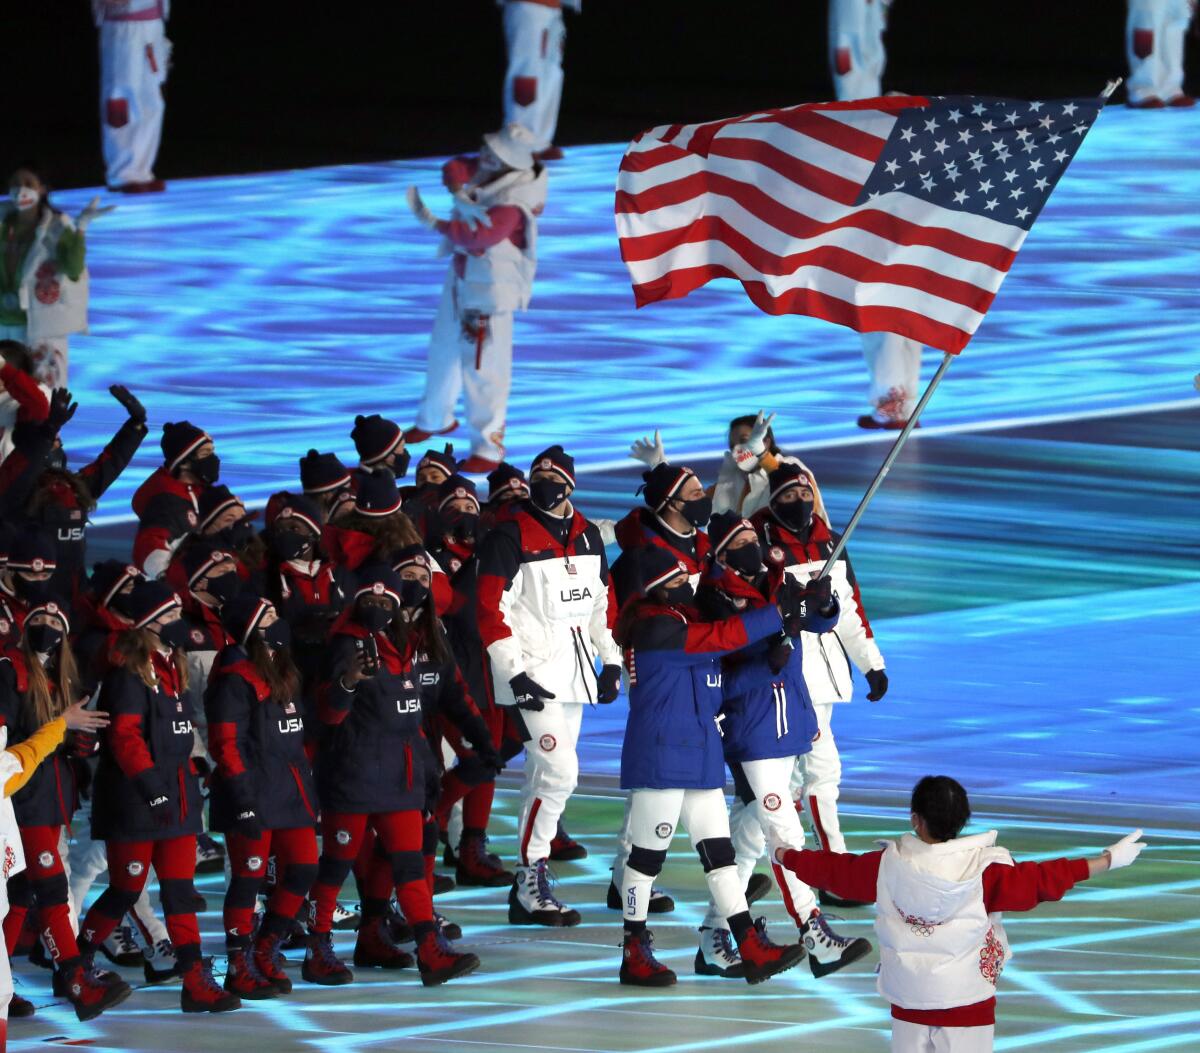 Two people hold the U.S. flag at the 2022 Olympics while a group follows them